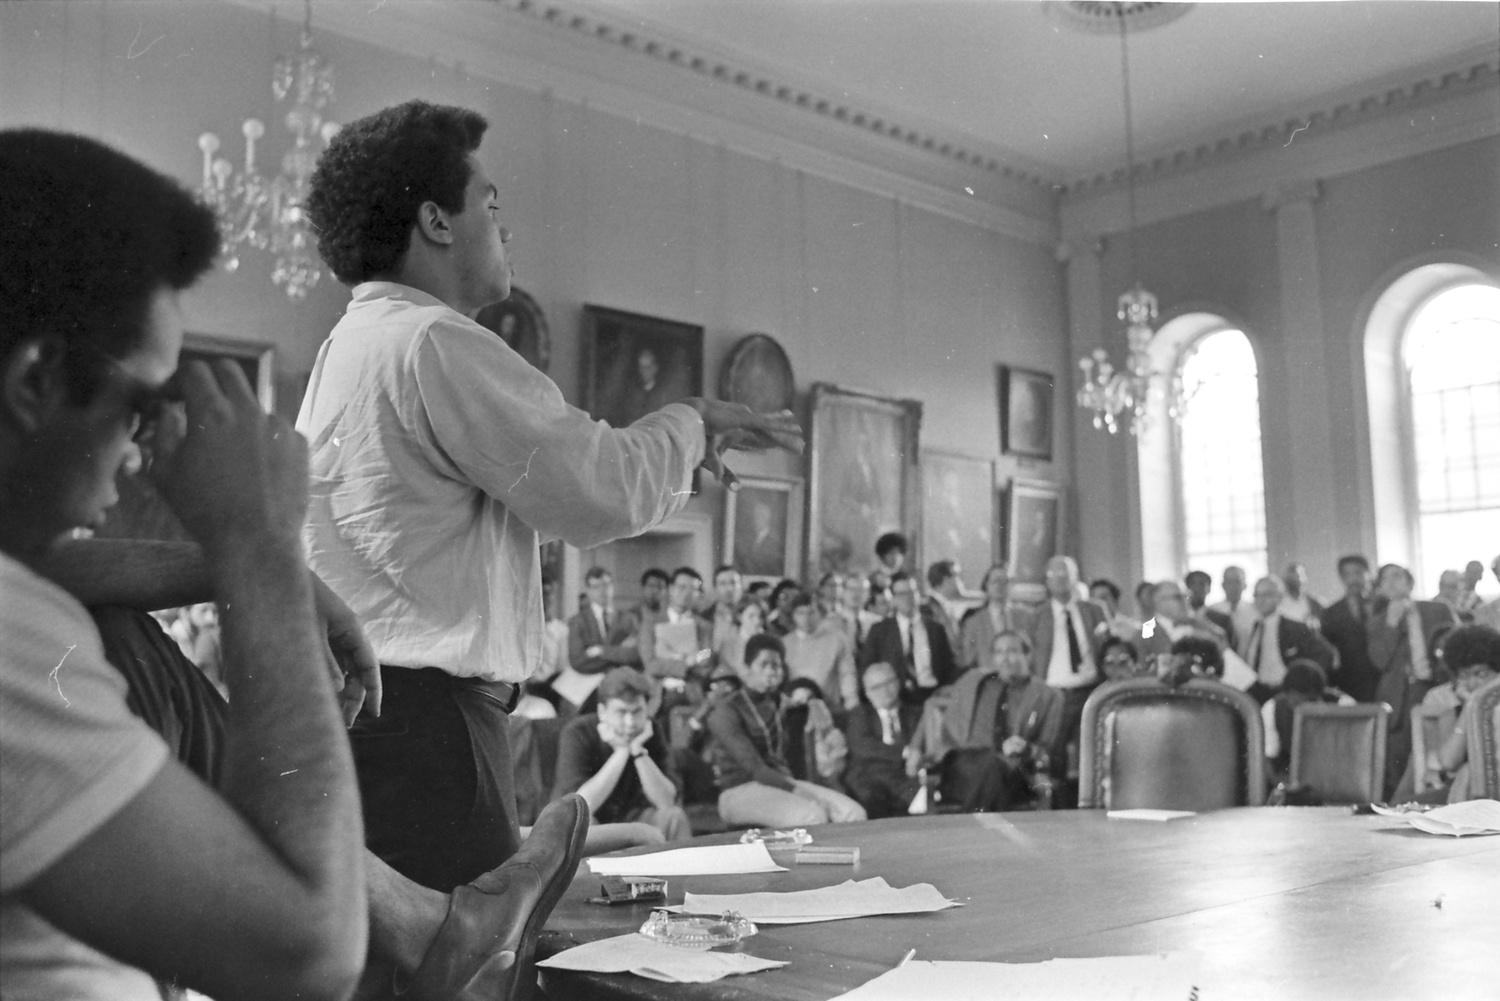 Wesley E. Profit '69, a member of AFRO, speaks at a meeting between AFRO members and Harvard faculty.